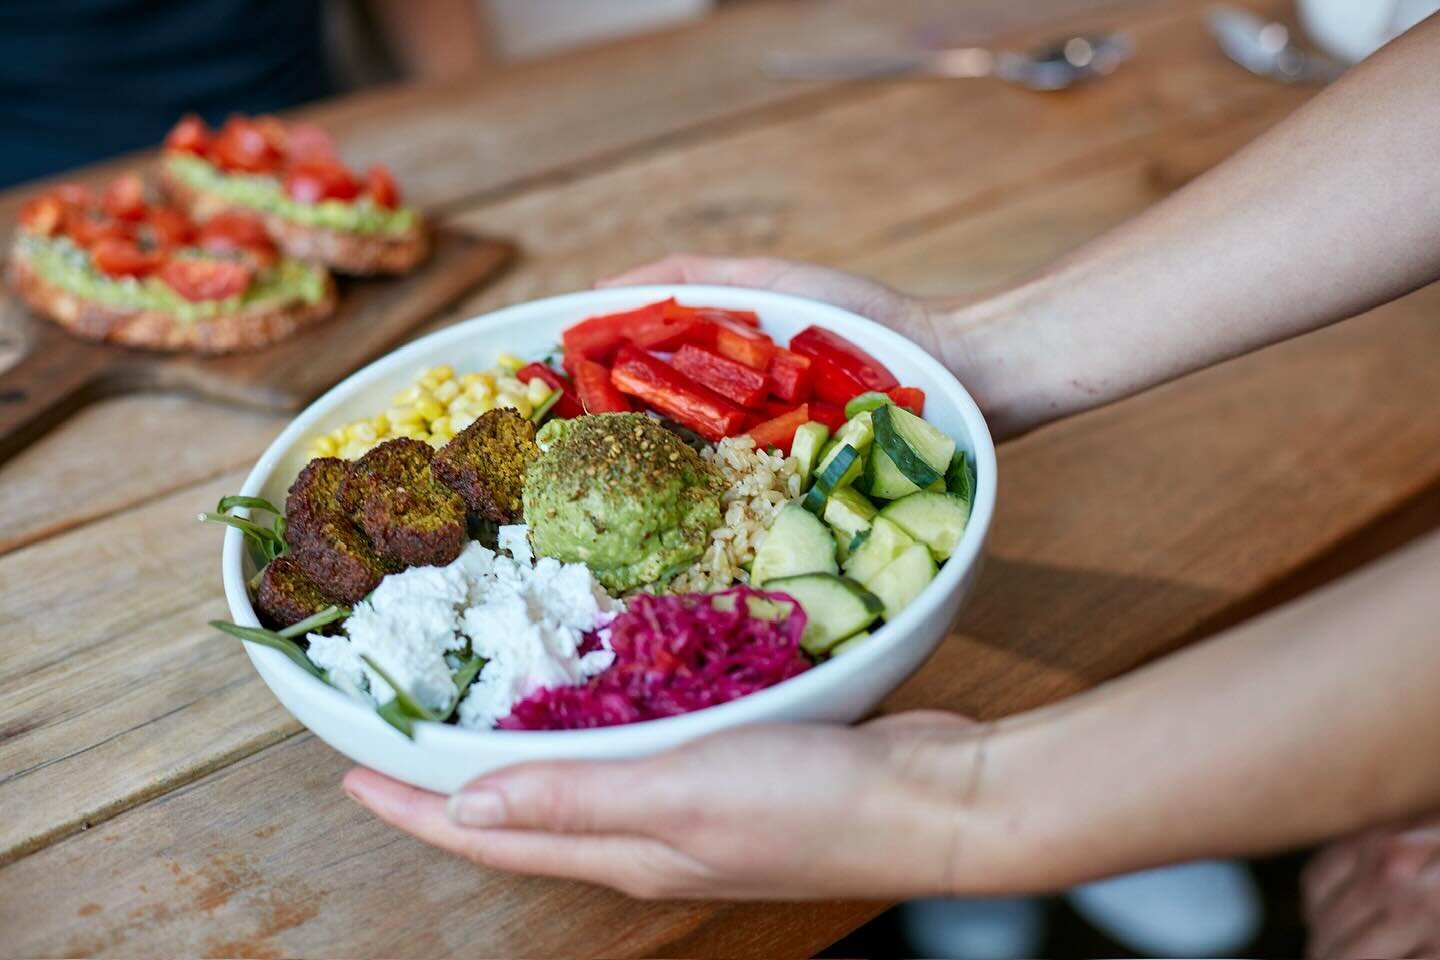 Our mez salad bowl 🥗

If you&rsquo;re a falafel lover, then this one is for you 🙌